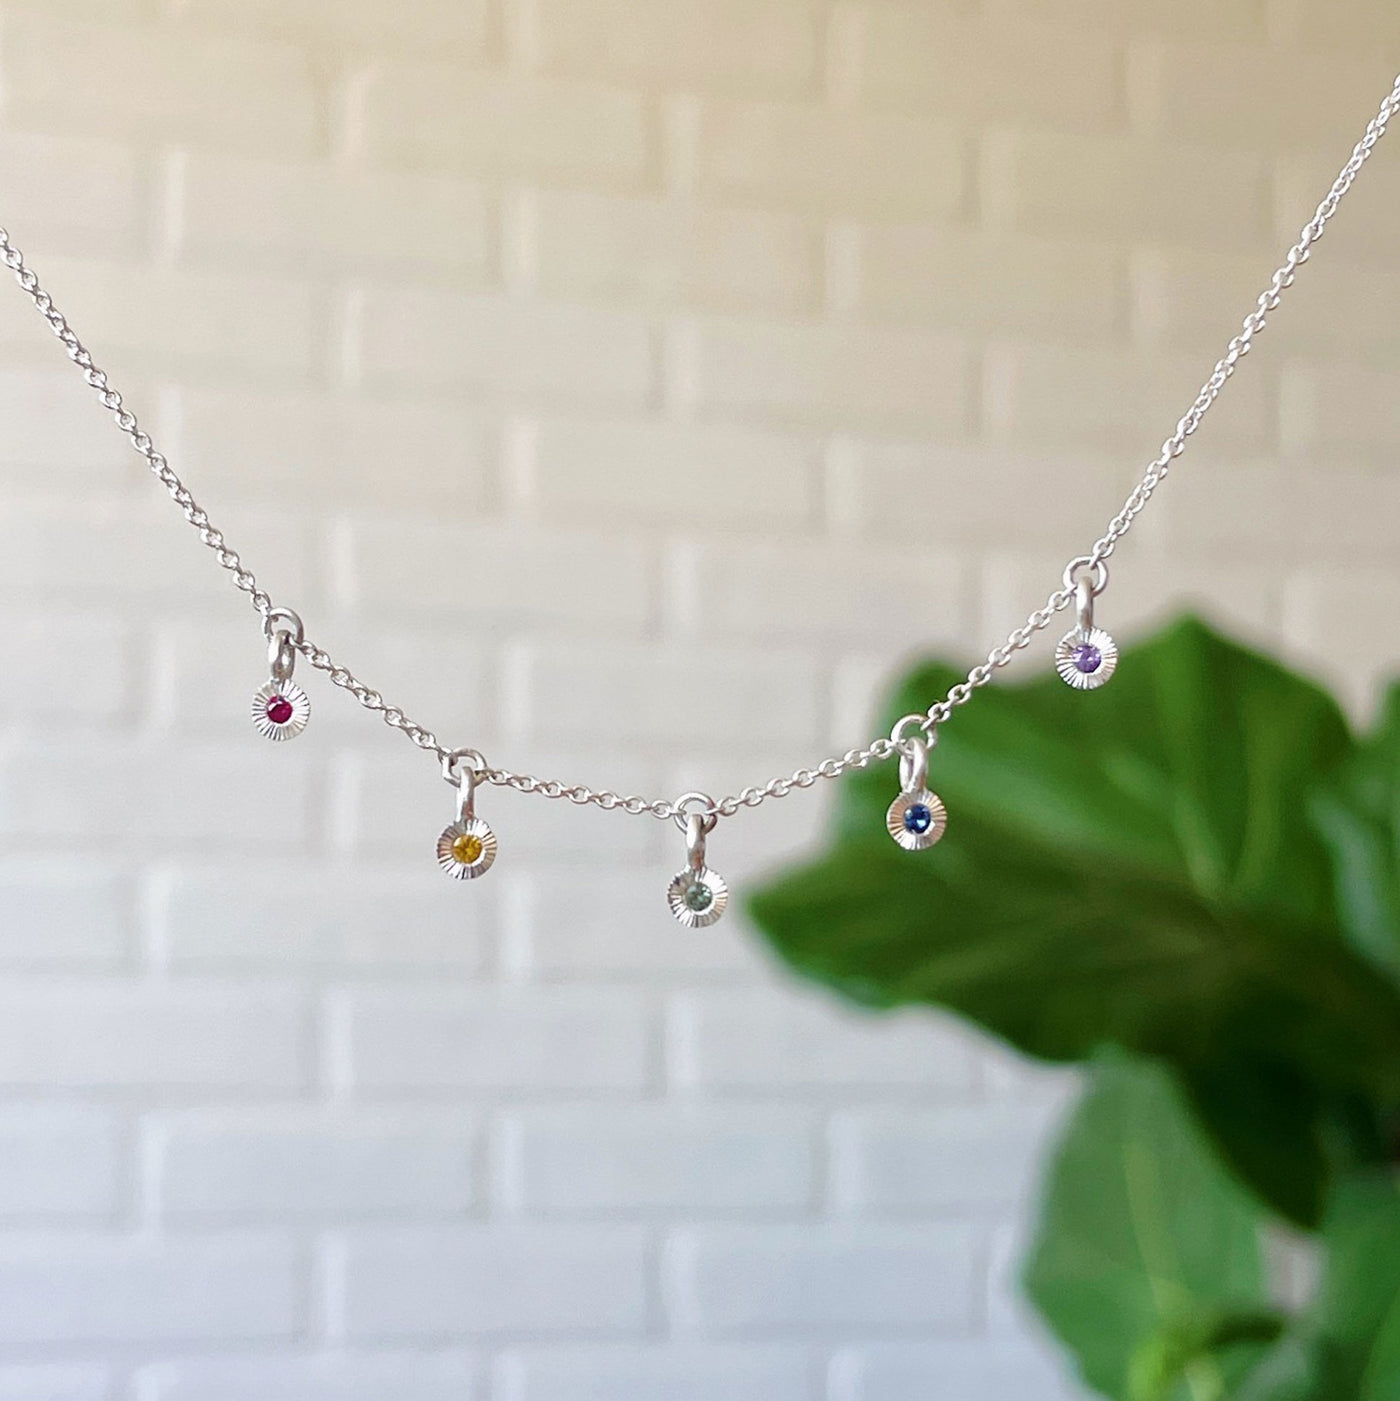 Rainbow Borealis Necklace in Sterling Silver hanging in front of a white brick wall